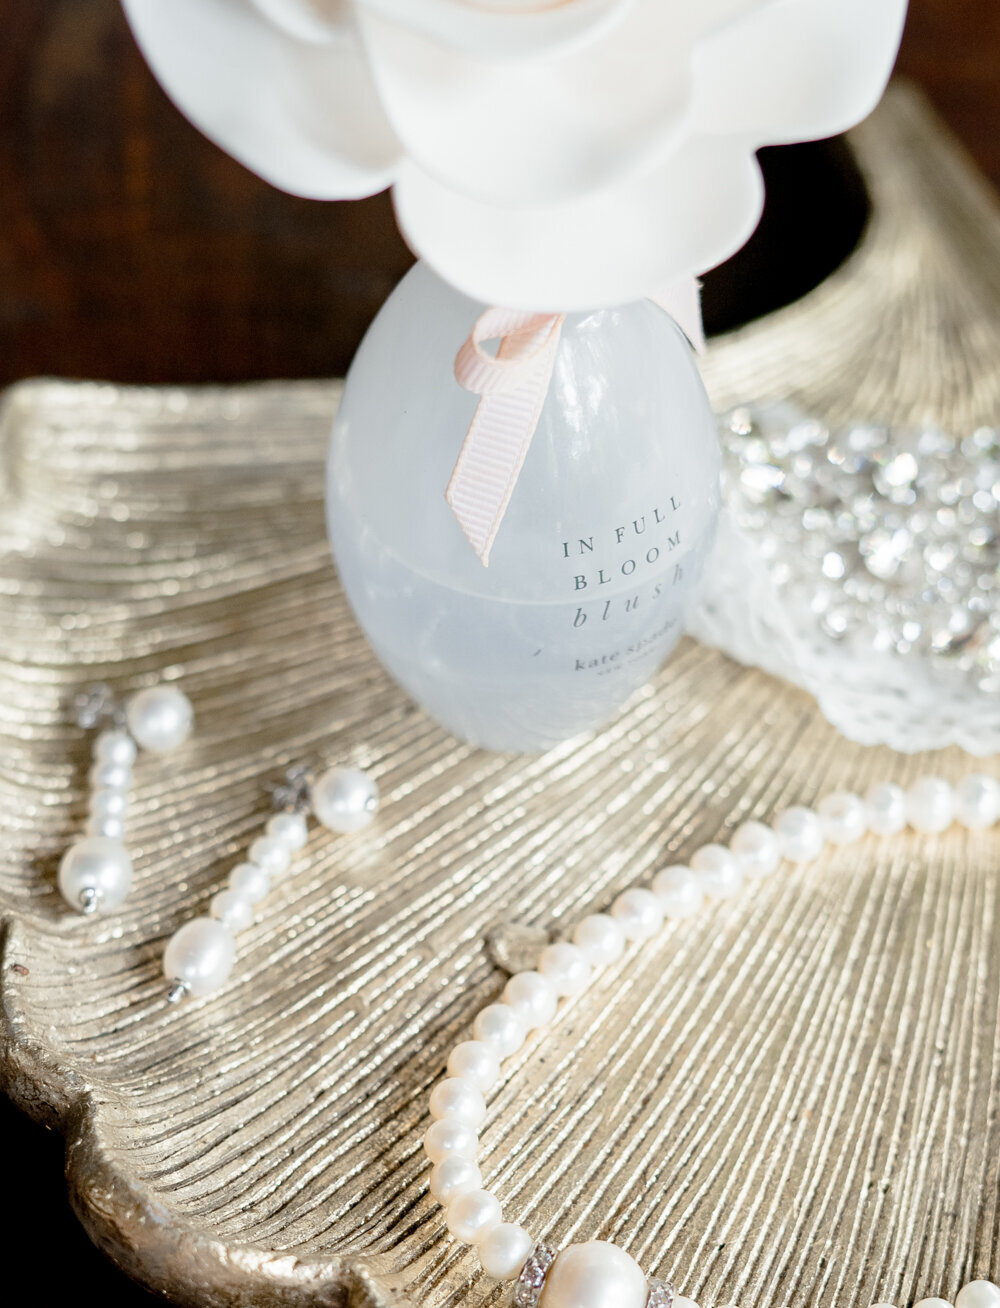 Kate Spade perfume and bridal accesories